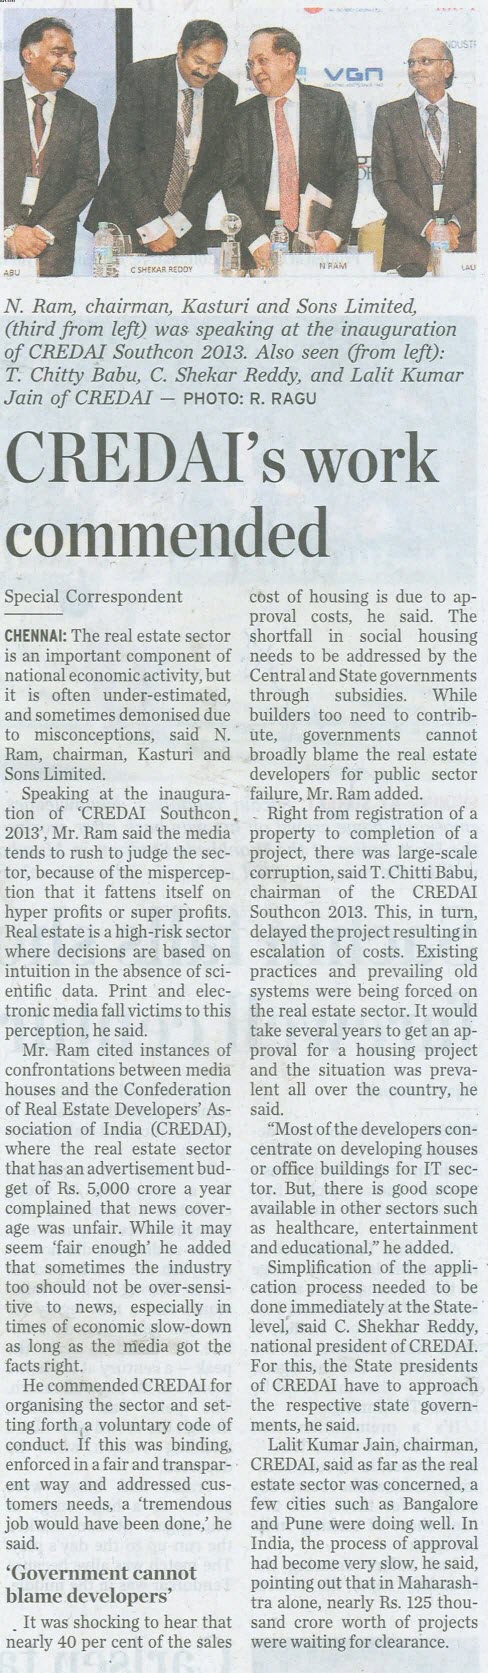 CREDAI’s work commended